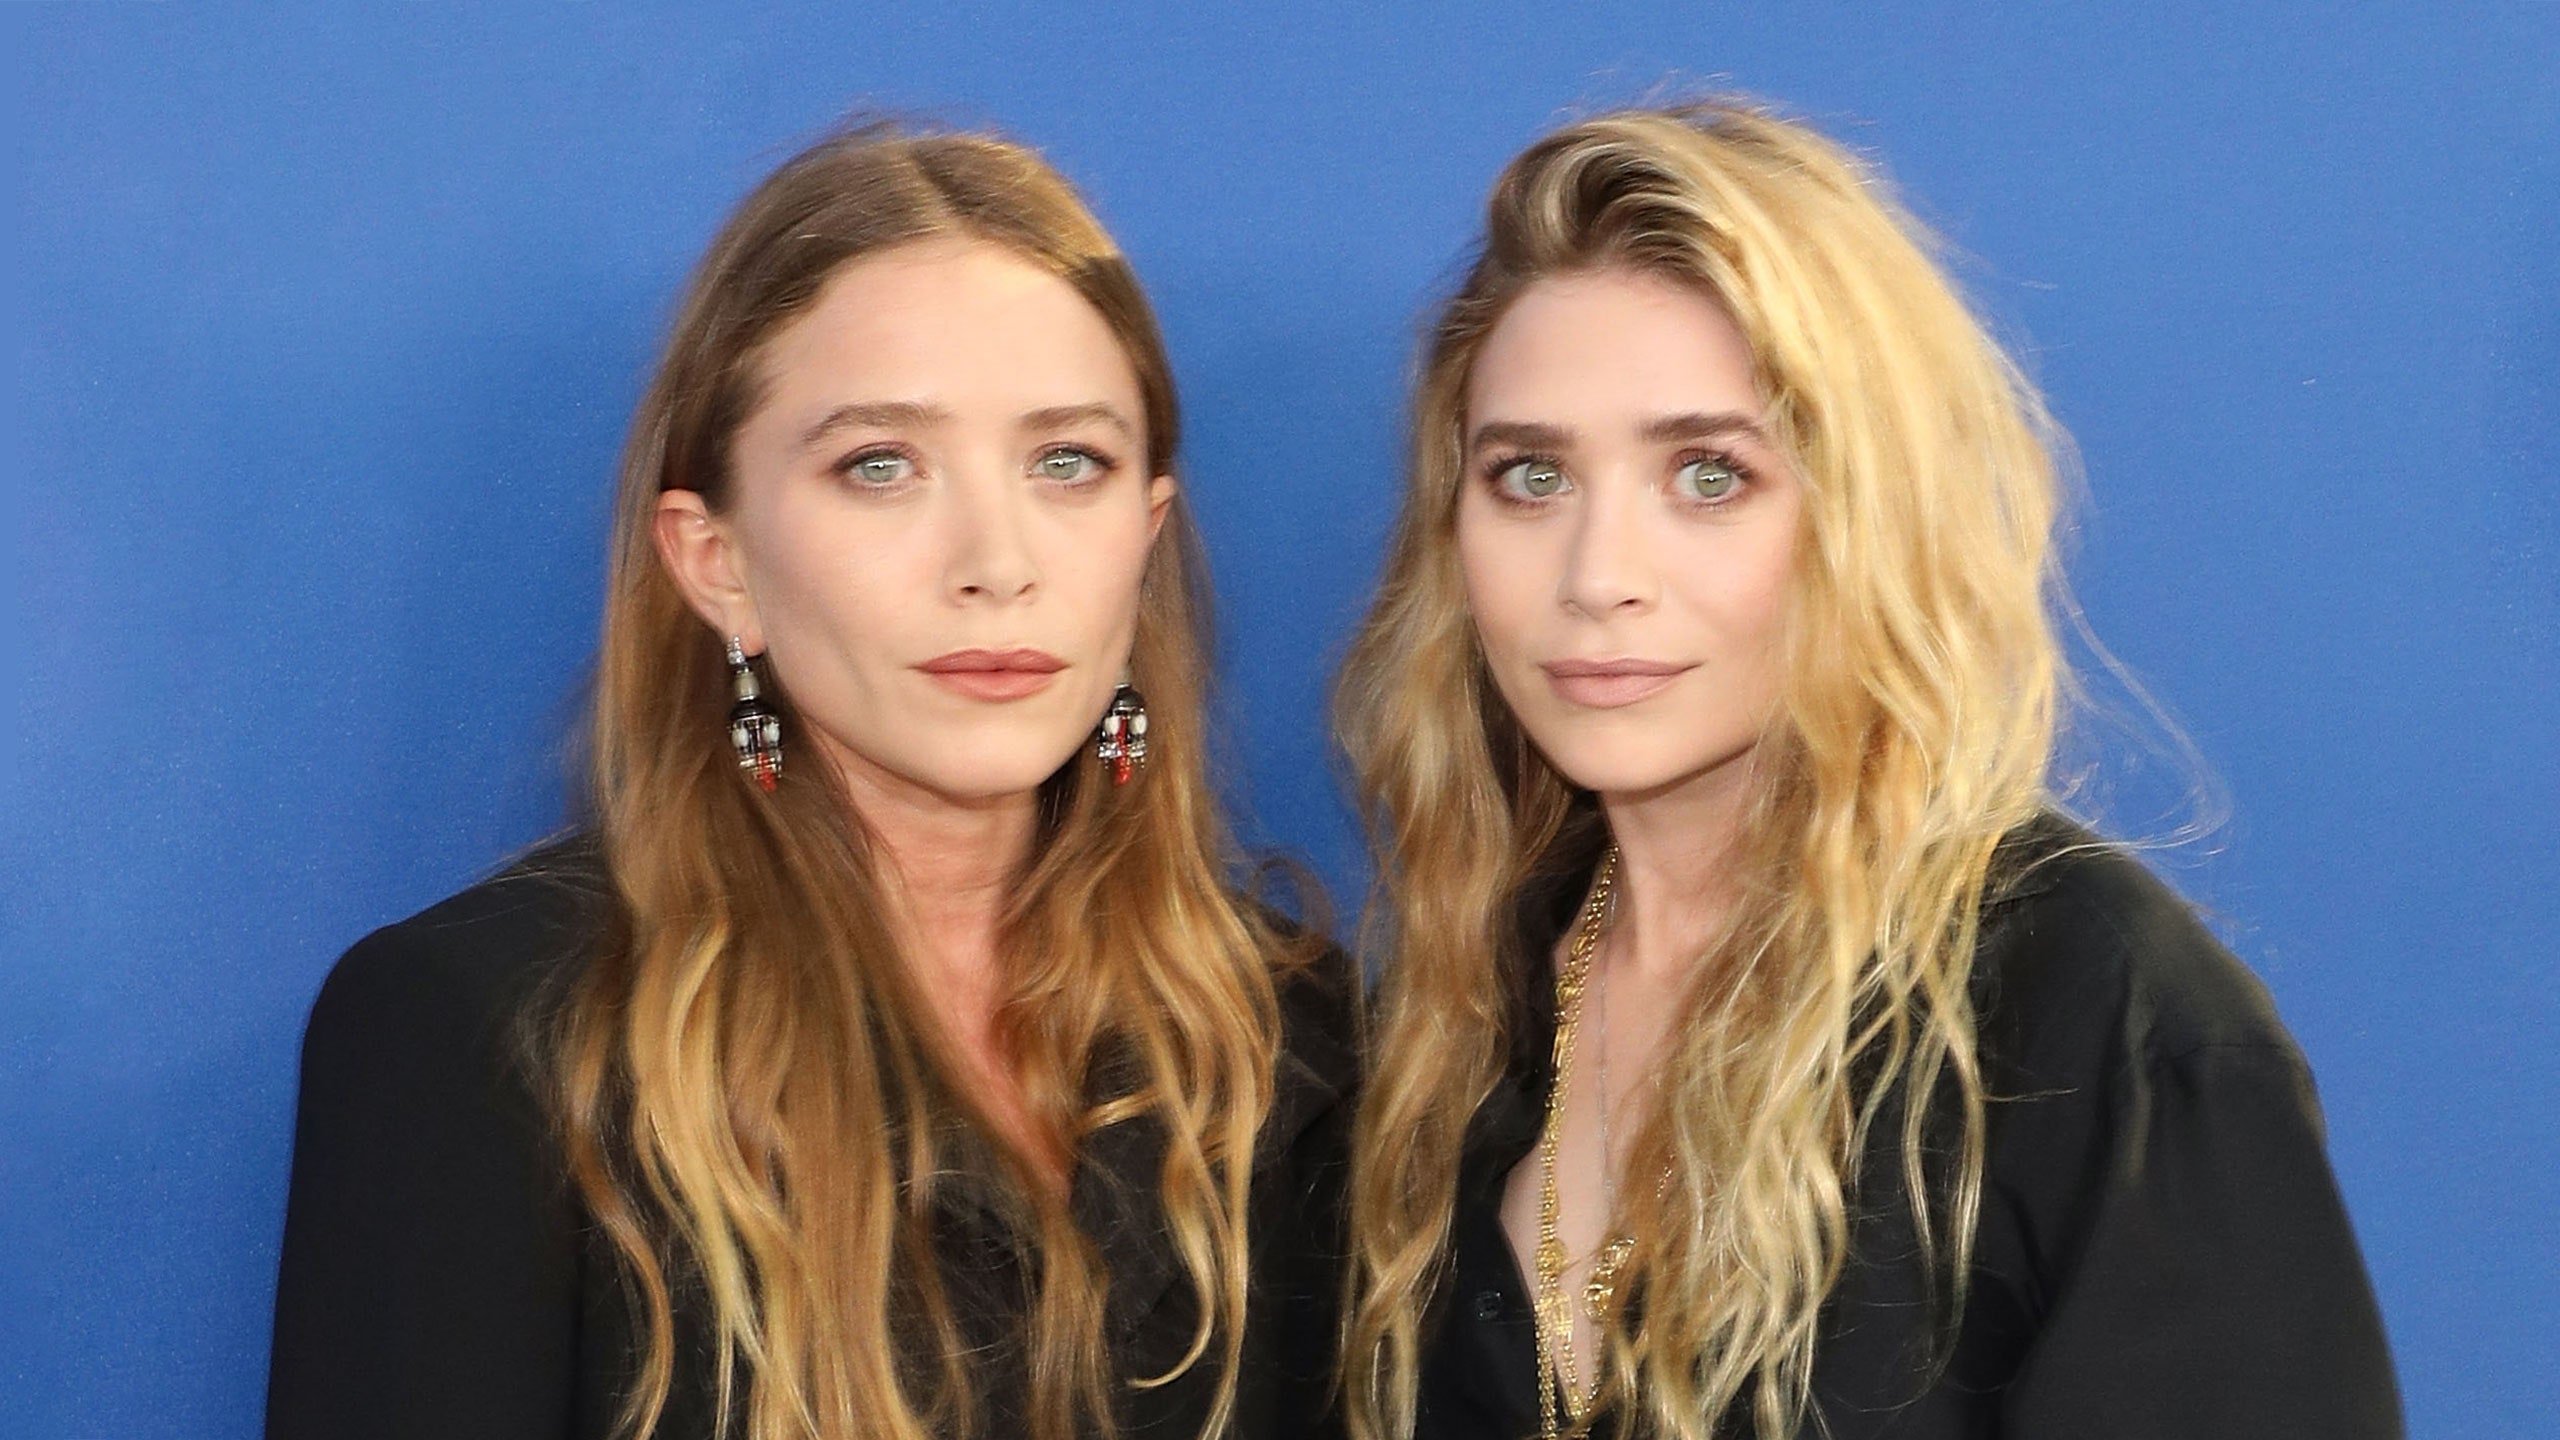 Mary Kate And Ashley Olsen's Elizabeth And James Line Is Coming To Kohl's